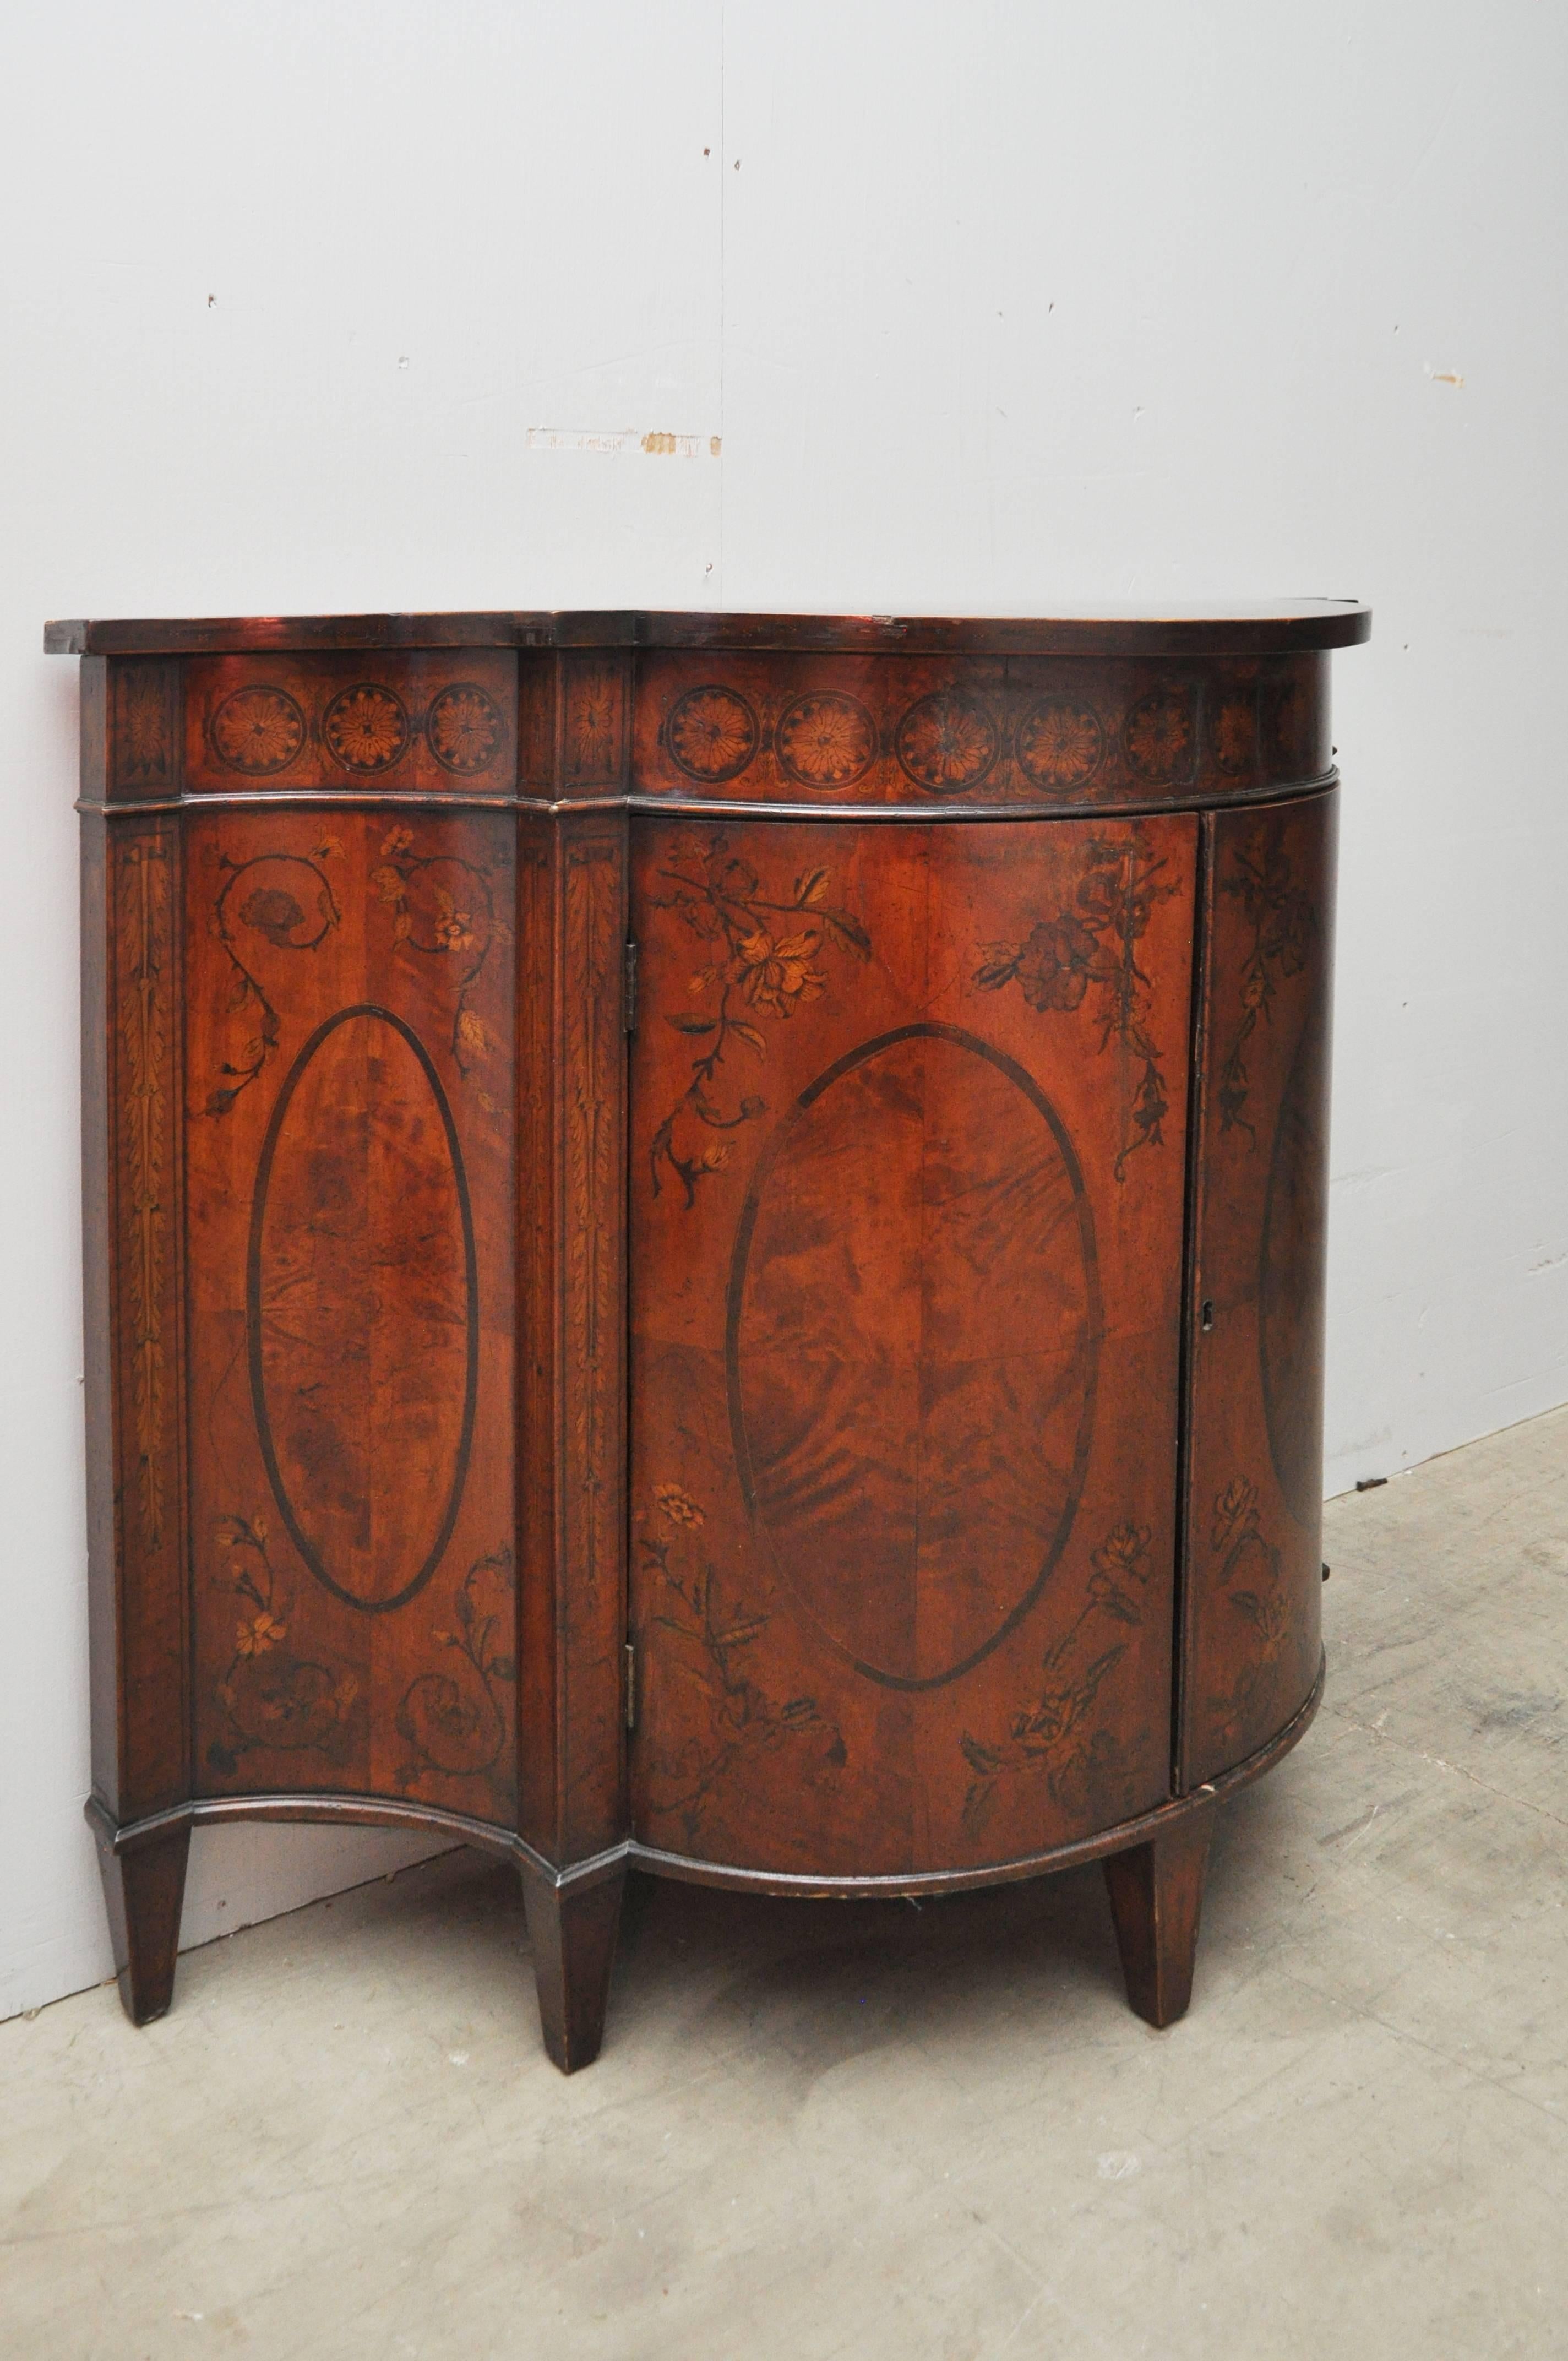 Serpentine Mahogany Inlaid Curved Cabinet In Good Condition For Sale In Geneva, IL